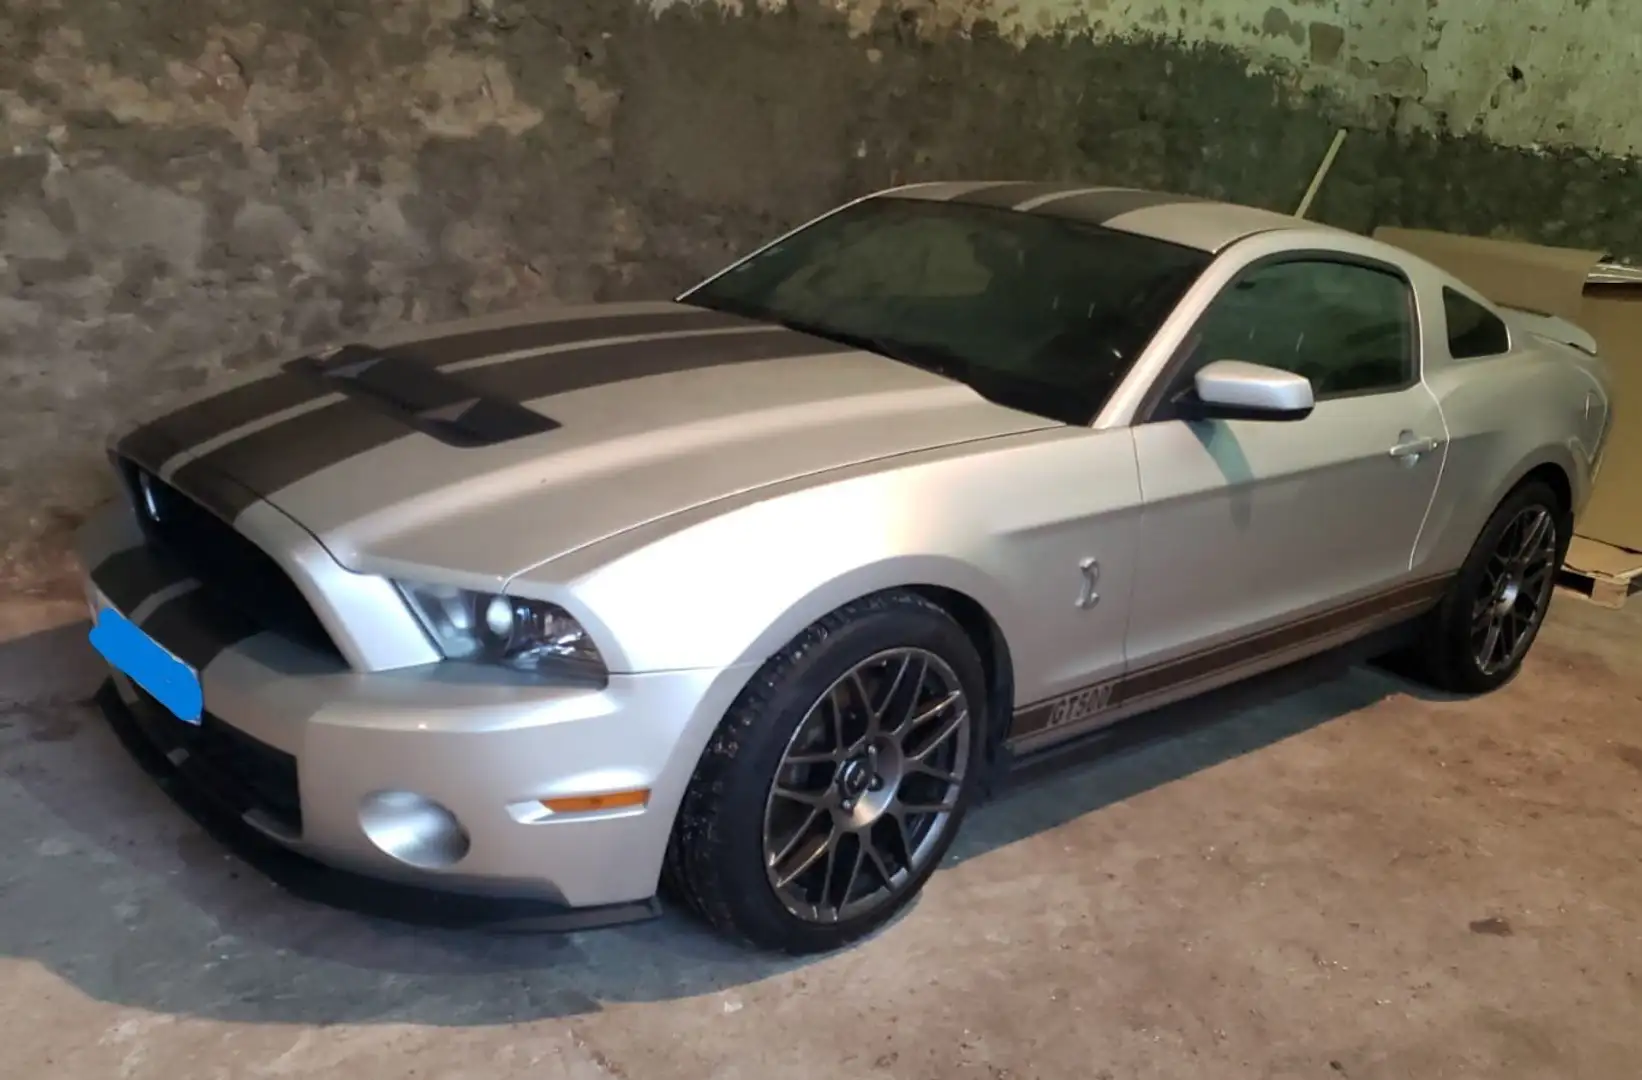 Ford Mustang GT 500 Shelby 2012 v8 5.4L Silver - 1